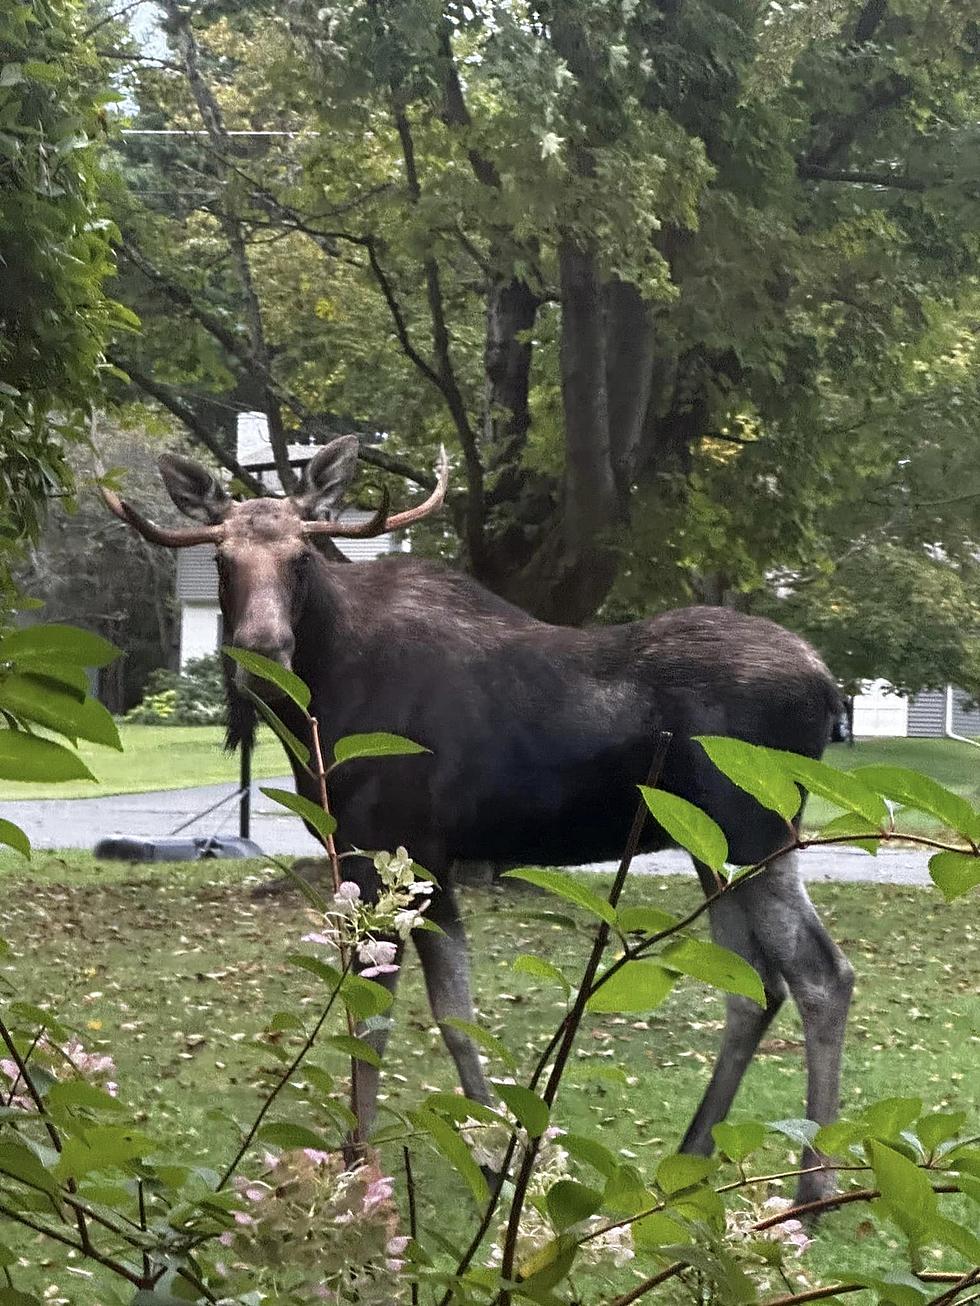 Pittsfield Man Stunned By Giant Moose On His Lawn (Video)